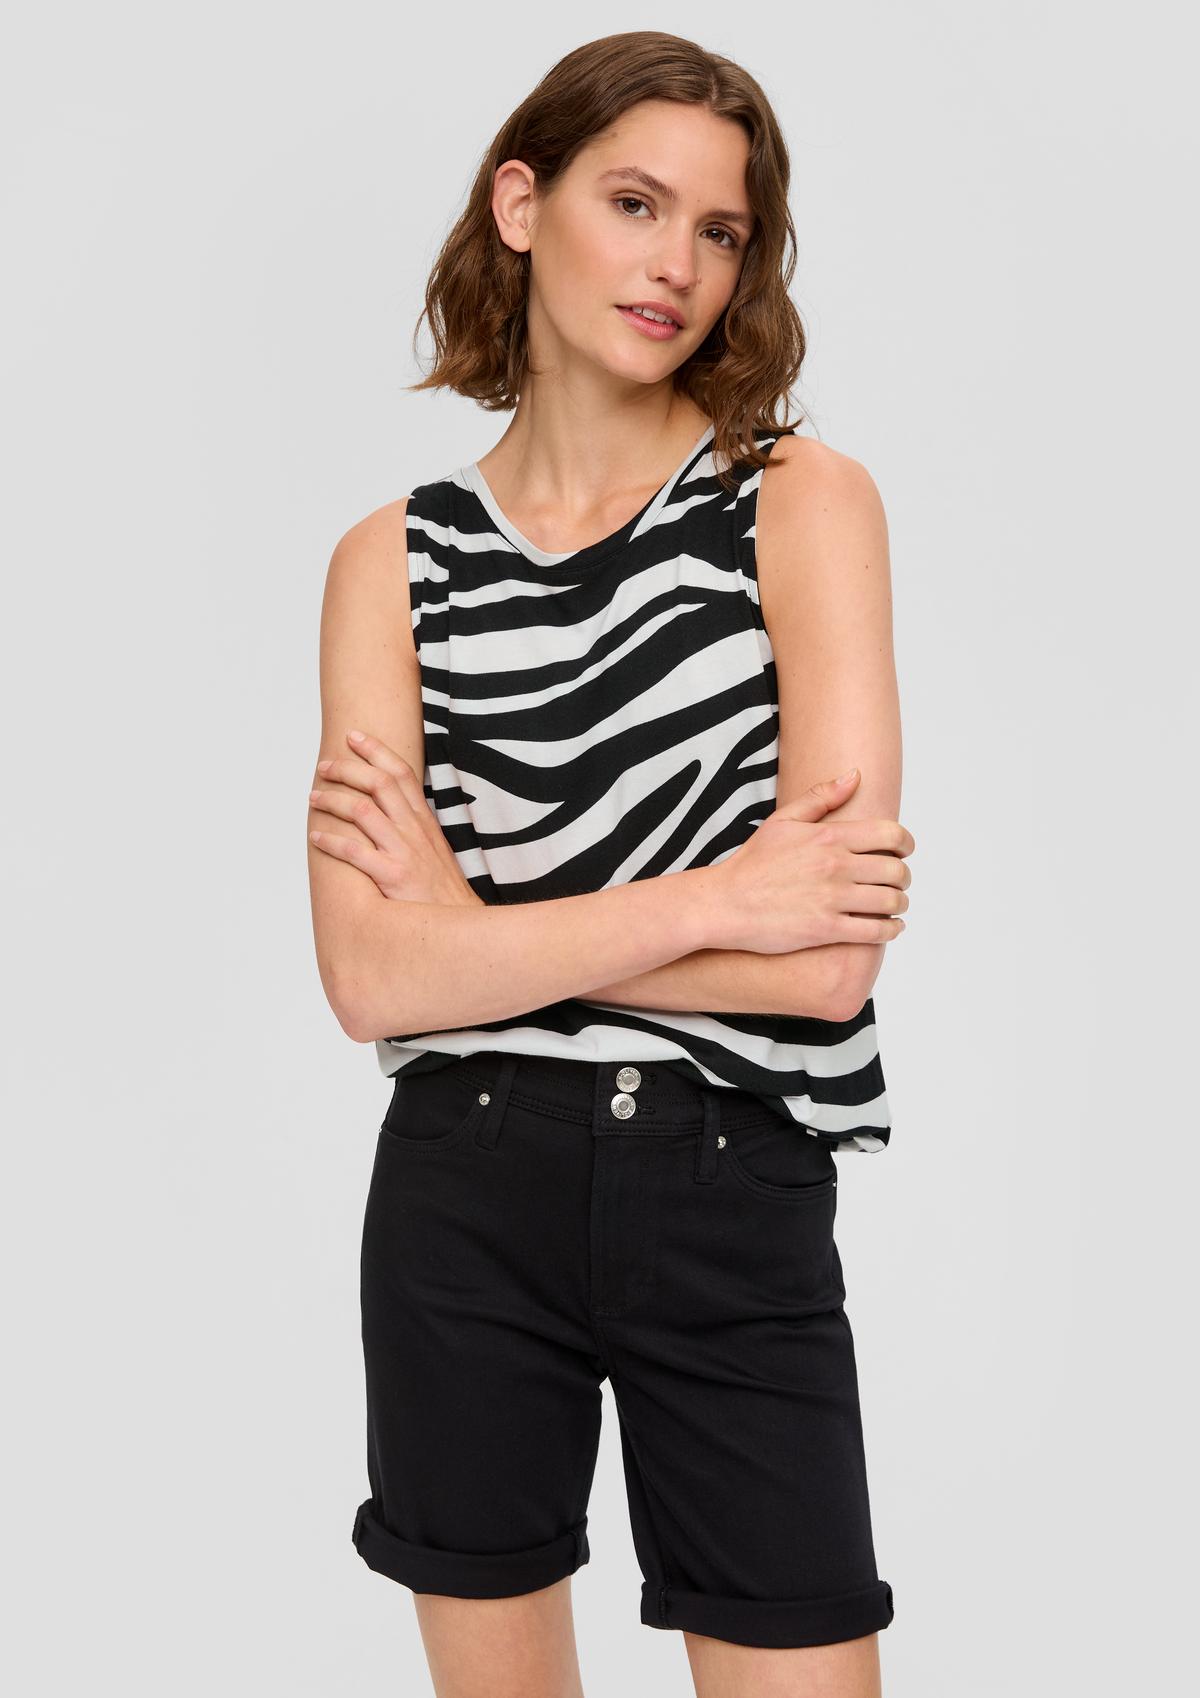 Sleeveless top with a round neckline and tie detail on the back